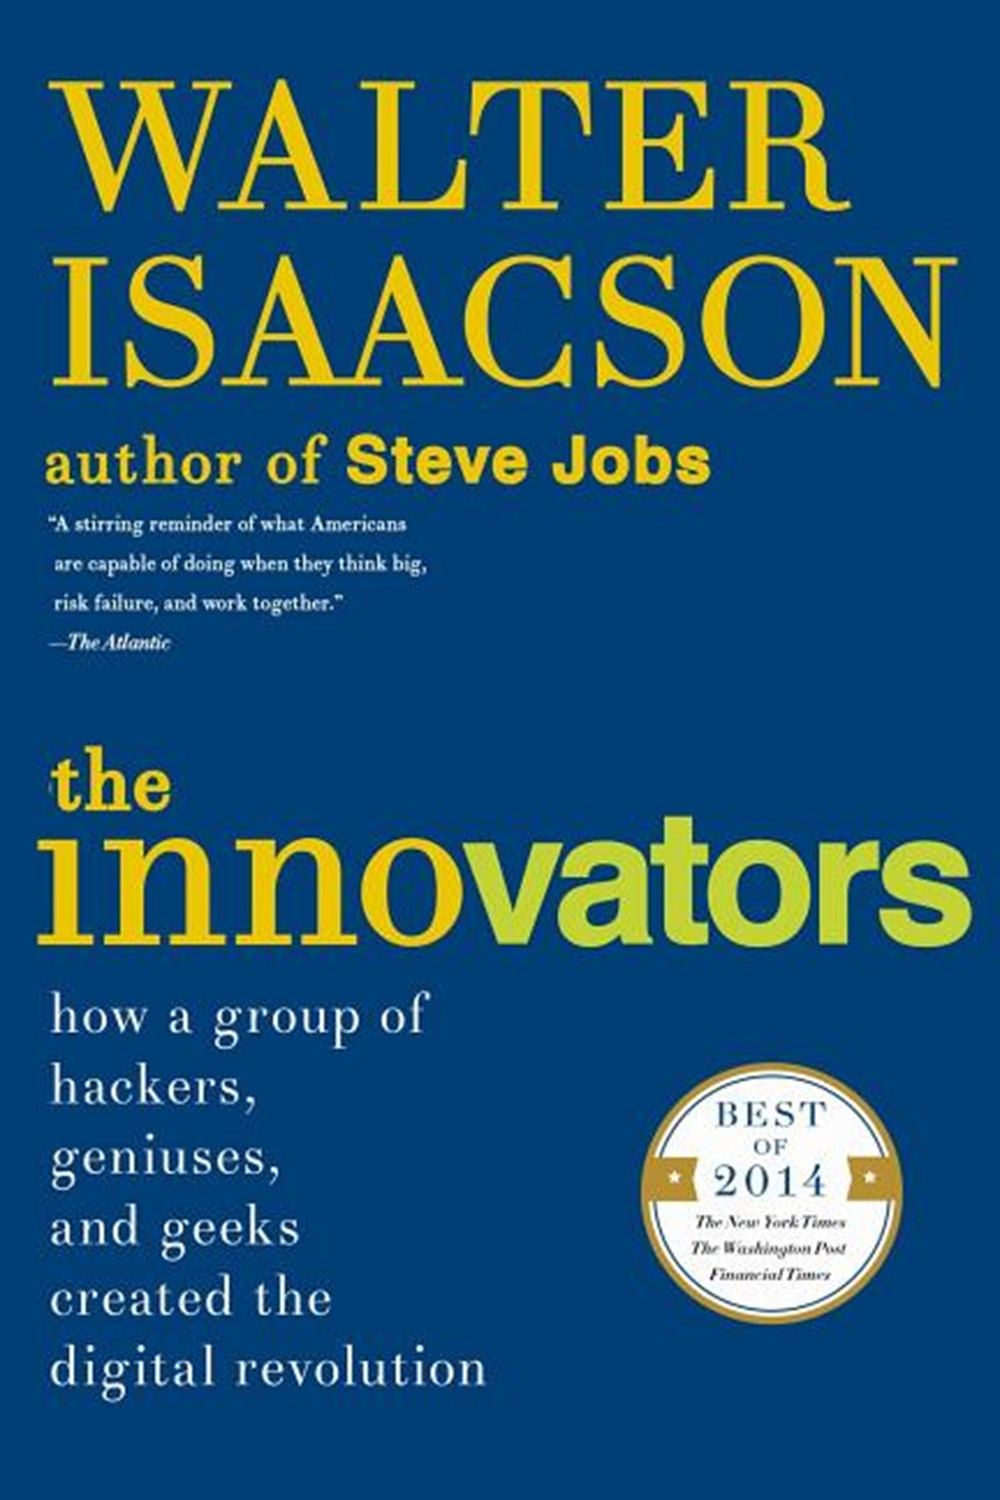 Innovators How a Group of Hackers, Geniuses, and Geeks Created the Digital Revolution